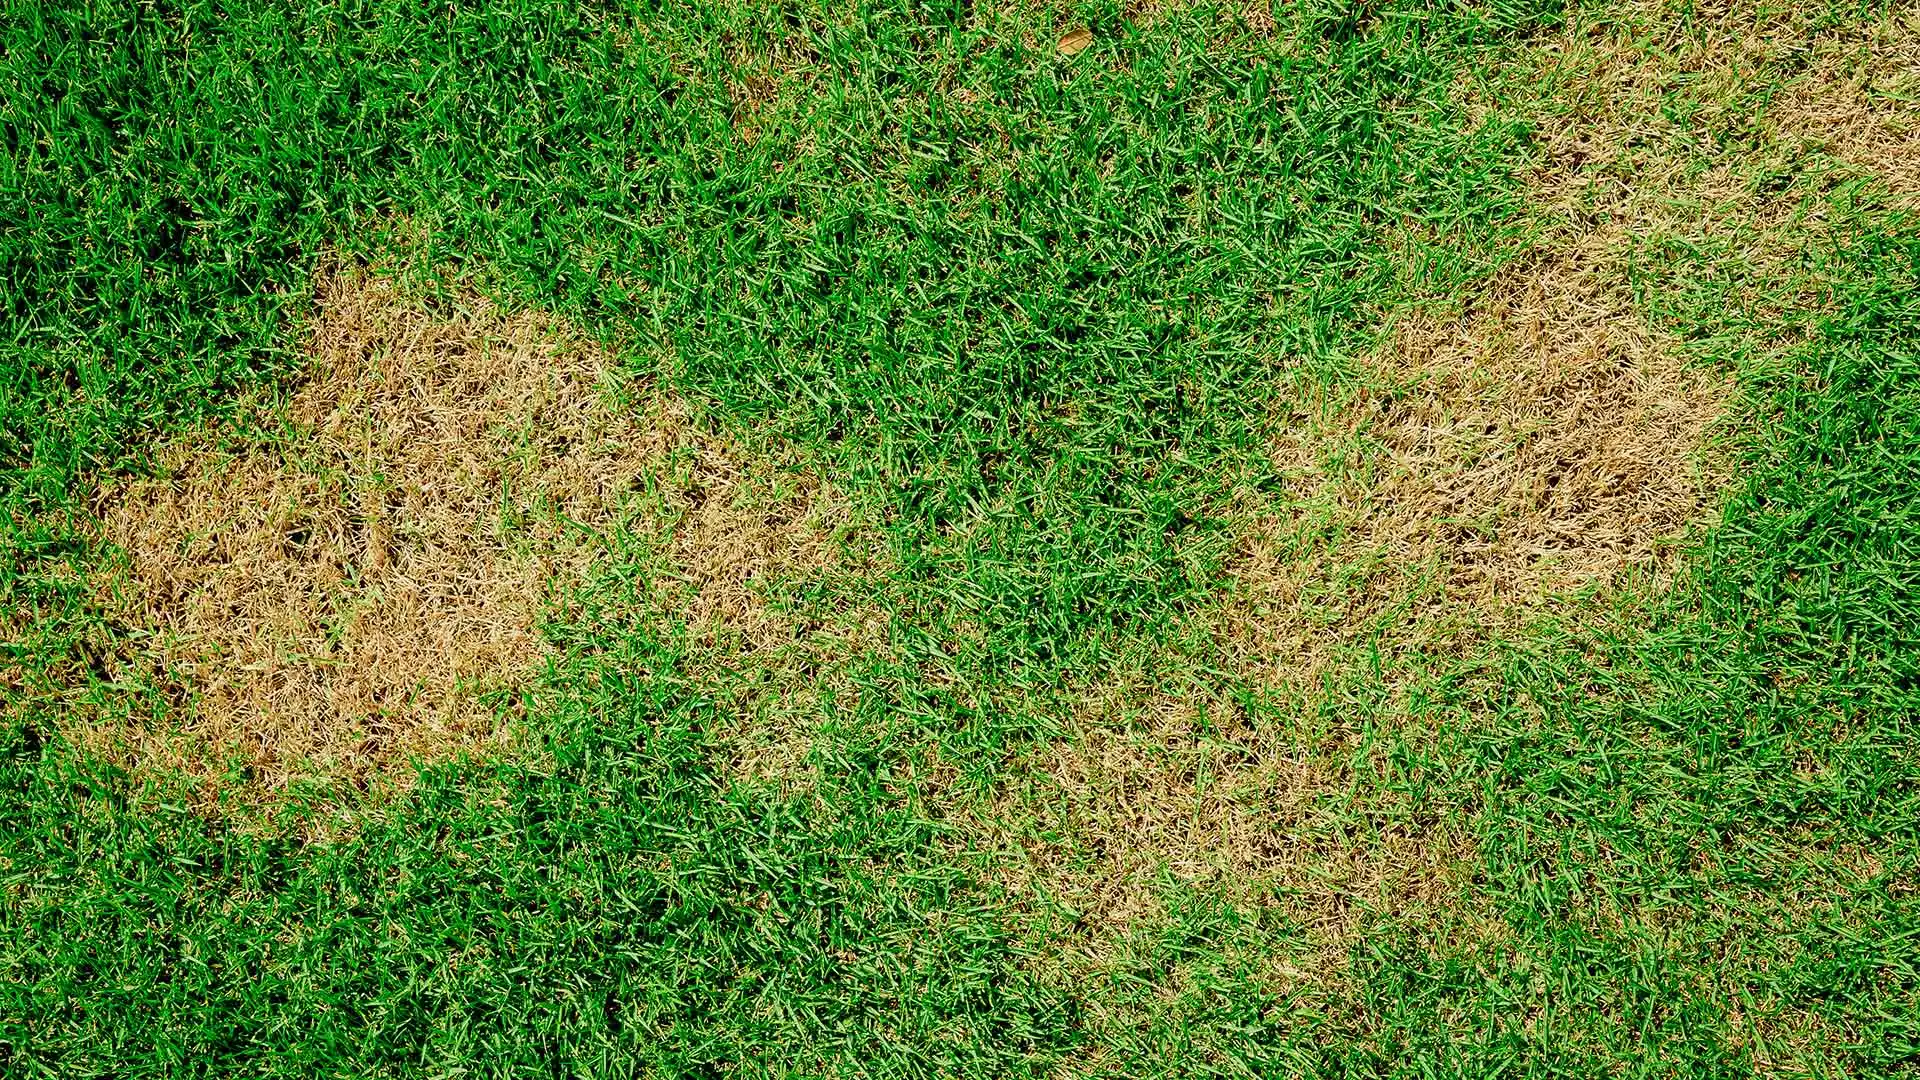 Brown Patch & Dollar Spot - Two Lawn Diseases to Watch Out for in Kansas